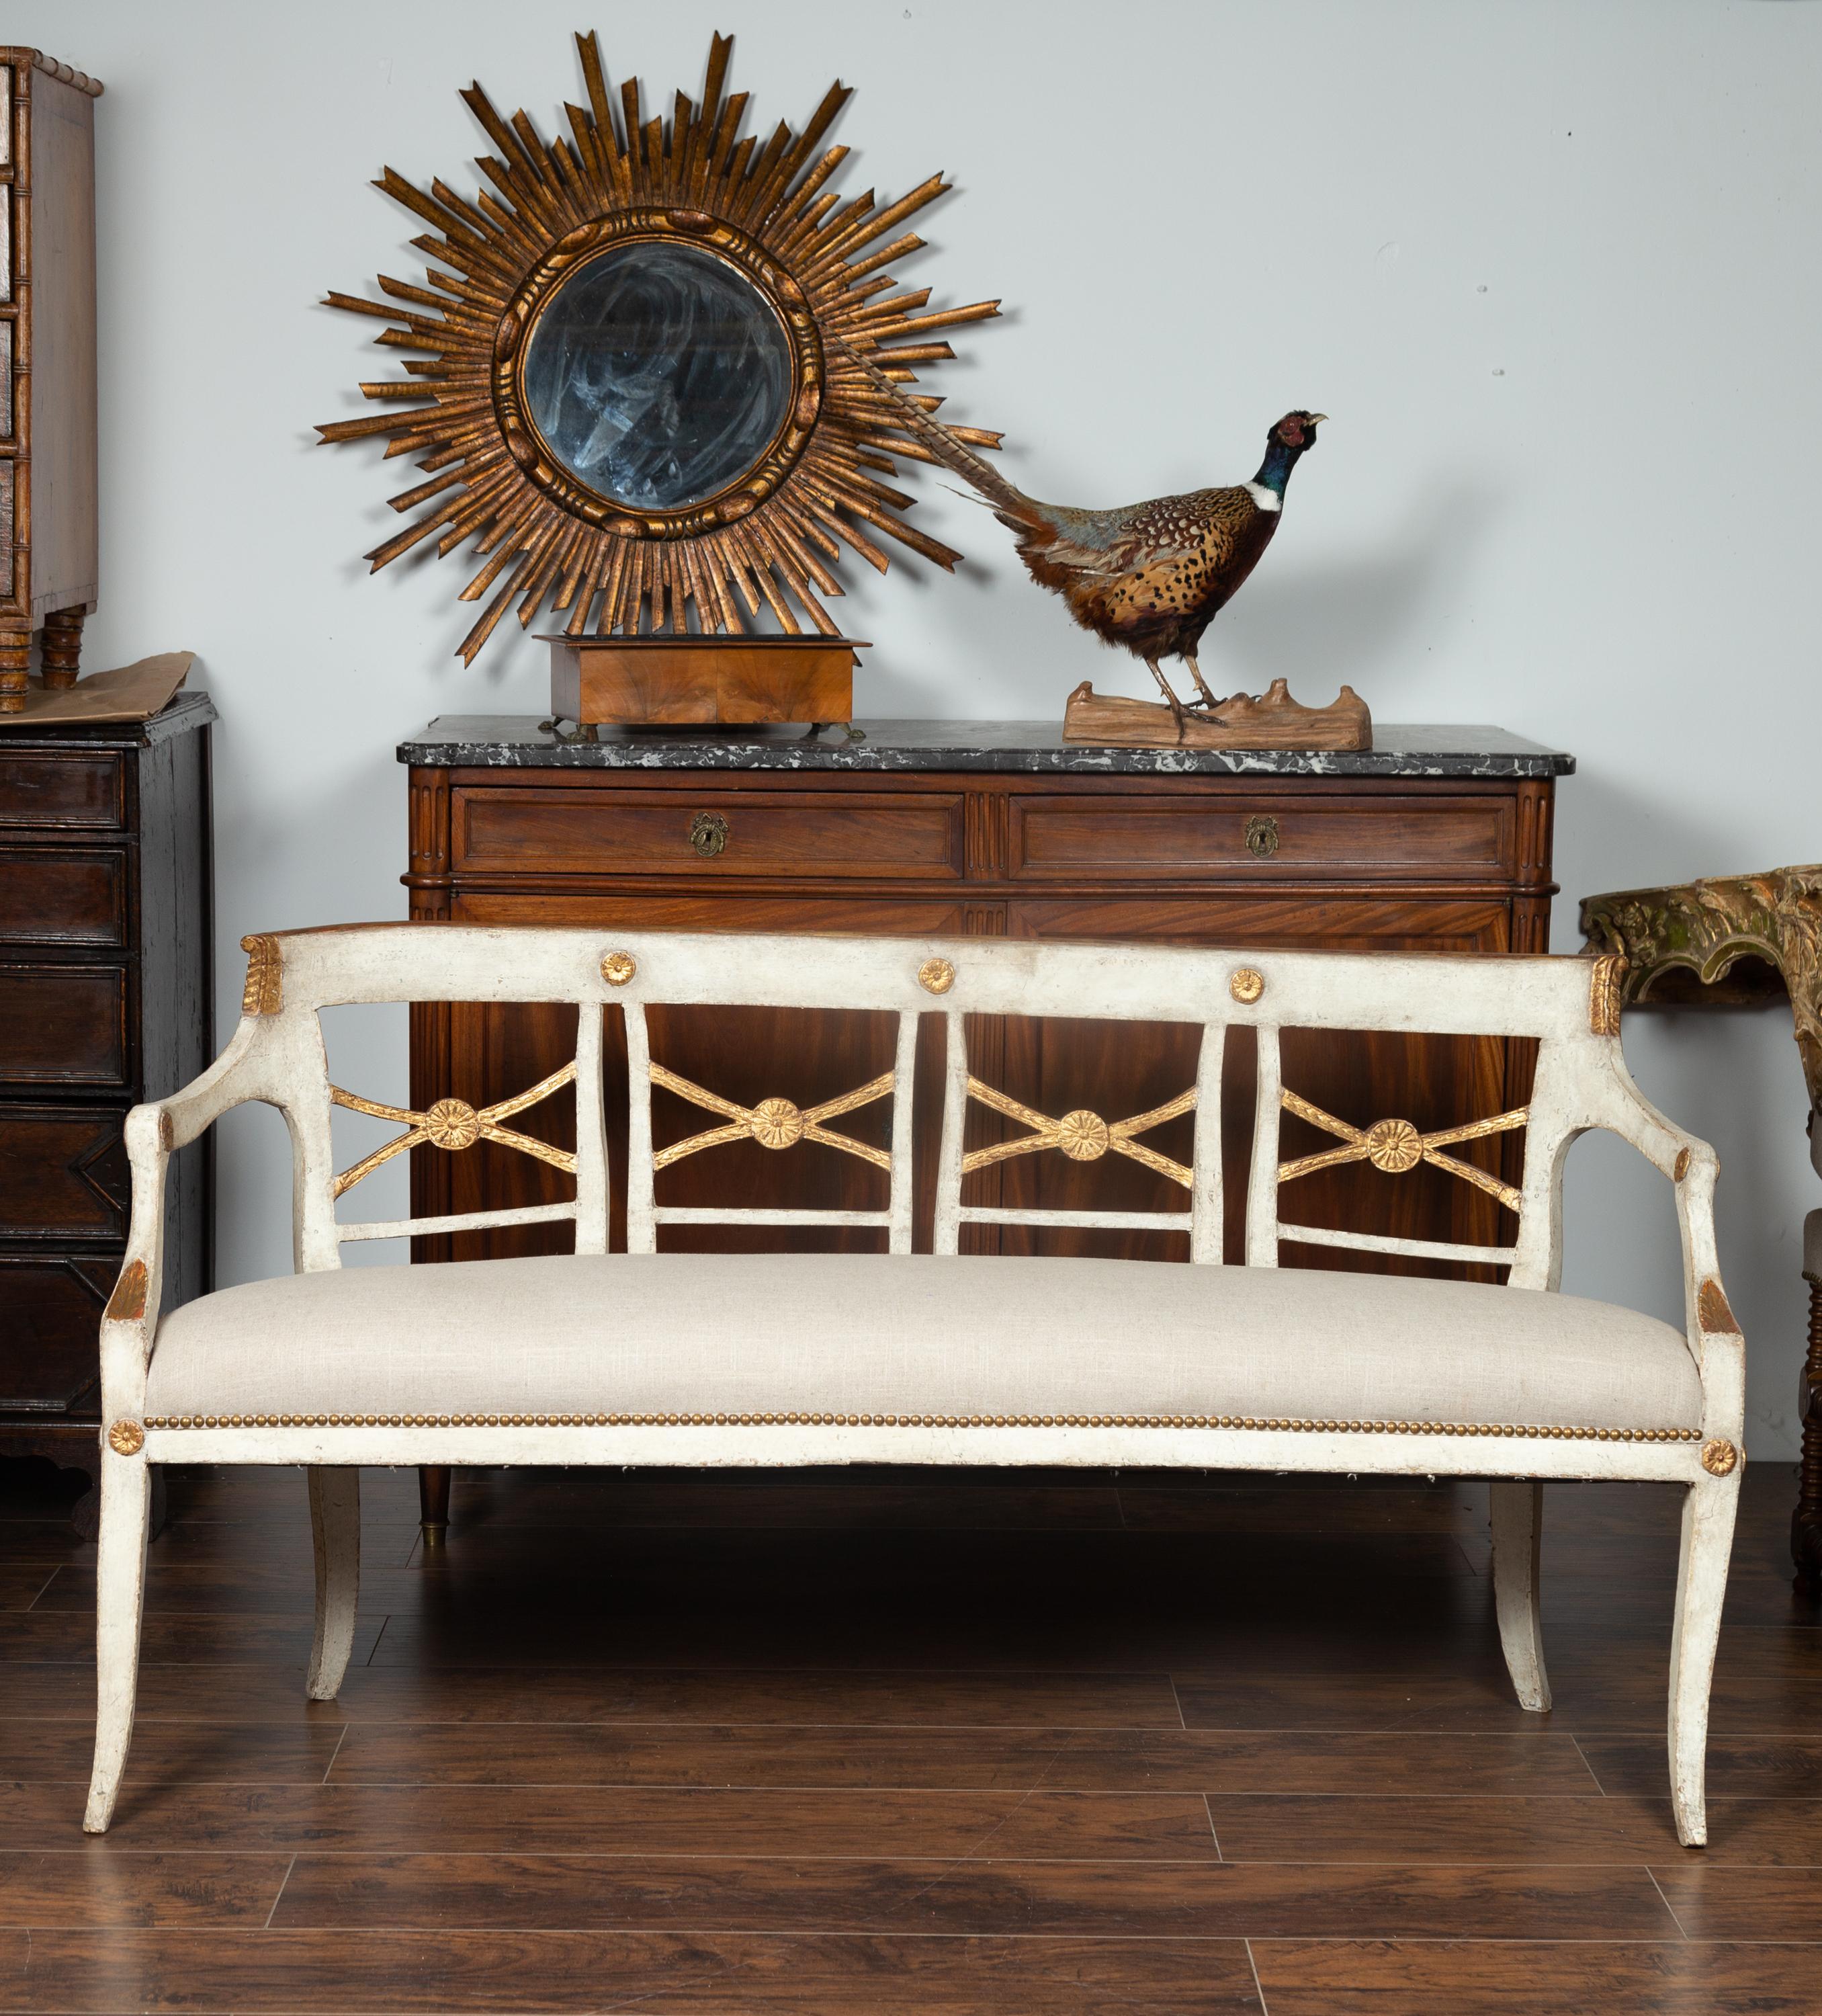 An Italian painted wood bench from the mid 19th century, with gilded accents and new upholstery. Born in Italy during the third quarter of the 19th century, this exquisite bench features an open back, accented with gilded X-motifs and delicate